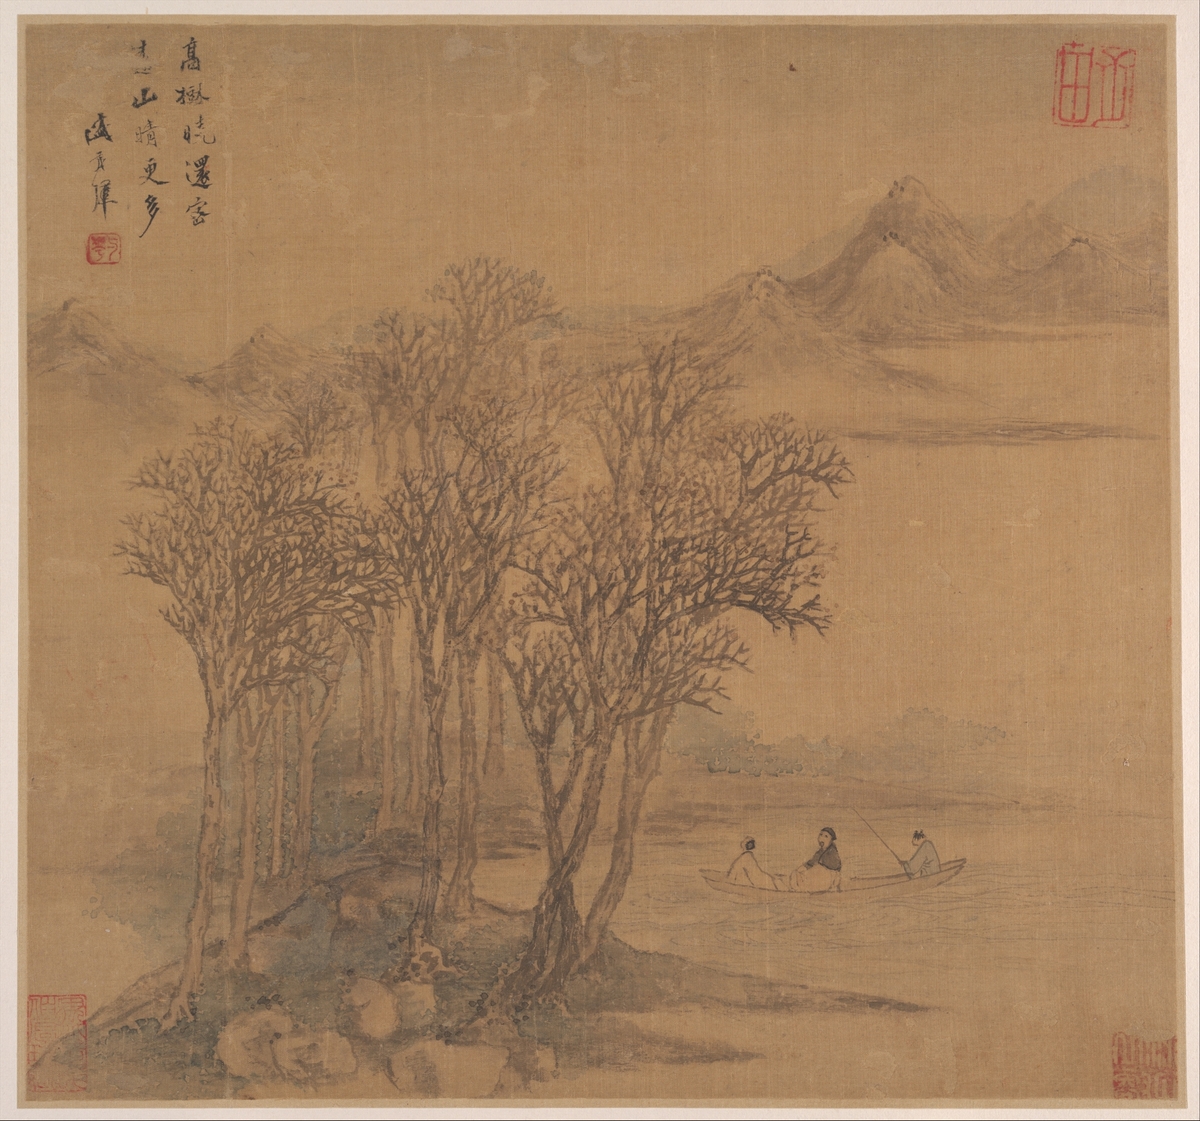 Landscapes after Tang Poems / Sheng Maoye / mid 17th century